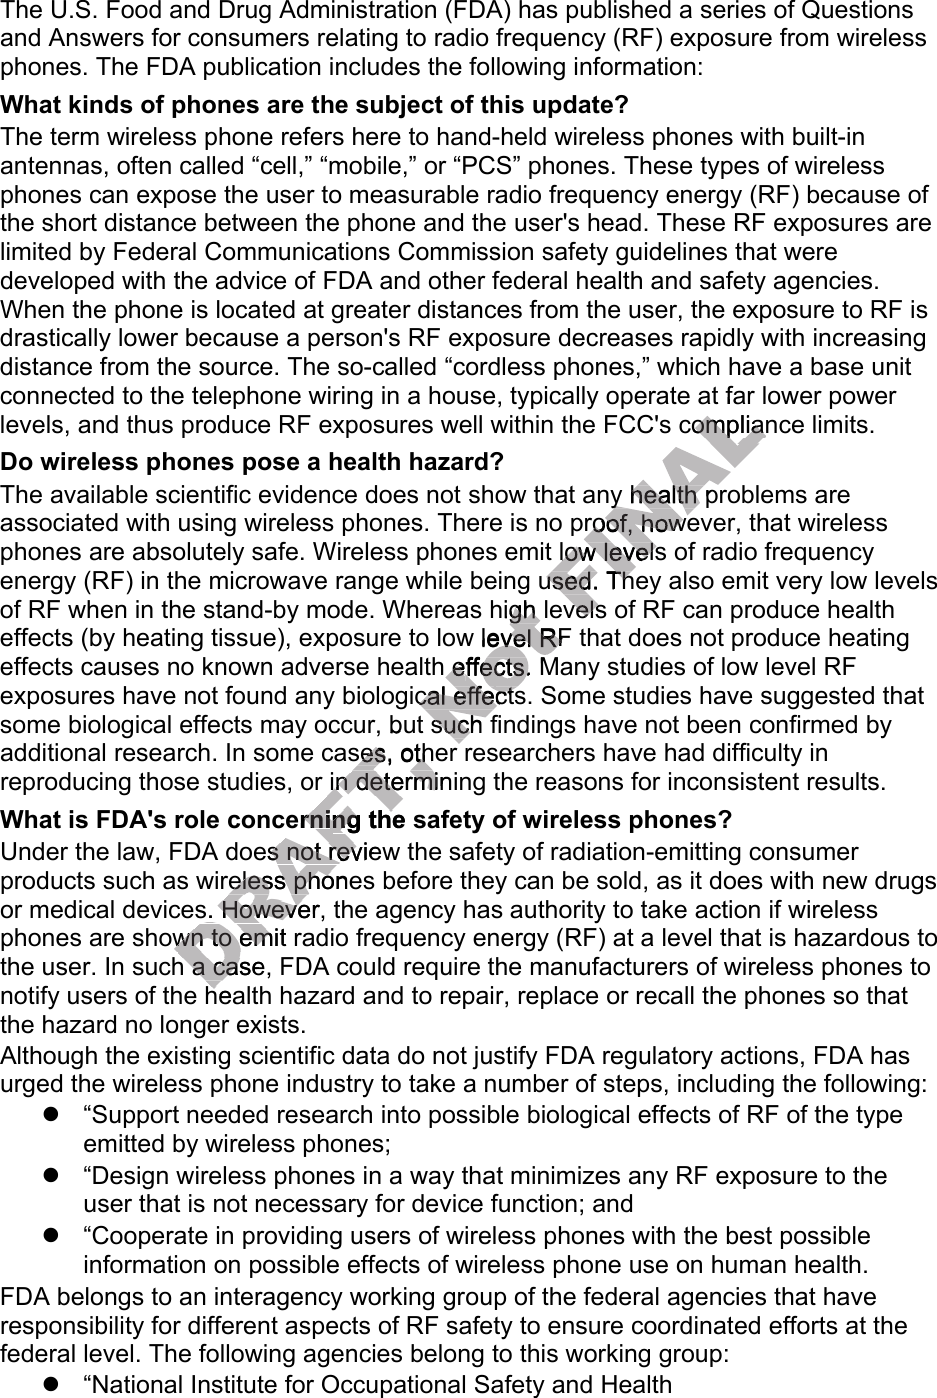 The U.S. Food and Drug Administration (FDA) has published a series of Questions and Answers for consumers relating to radio frequency (RF) exposure from wireless phones. The FDA publication includes the following information:What kinds of phones are the subject of this update?The term wireless phone refers here to hand-held wireless phones with built-in antennas, often called “cell,” “mobile,” or “PCS” phones. These types of wireless phones can expose the user to measurable radio frequency energy (RF) because of the short distance between the phone and the user&apos;s head. These RF exposures are limited by Federal Communications Commission safety guidelines that were developed with the advice of FDA and other federal health and safety agencies. When the phone is located at greater distances from the user, the exposure to RF is drastically lower because a person&apos;s RF exposure decreases rapidly with increasing distance from the source. The so-called “cordless phones,” which have a base unit connected to the telephone wiring in a house, typically operate at far lower power levels, and thus produce RF exposures well within the FCC&apos;s compliance limits.Do wireless phones pose a health hazard?The available scientific evidence does not show that any health problems are associated with using wireless phones. There is no proof, however, that wireless phones are absolutely safe. Wireless phones emit low levels of radio frequency energy (RF) in the microwave range while being used. They also emit very low levels of RF when in the stand-by mode. Whereas high levels of RF can produce health effects (by heating tissue), exposure to low level RF that does not produce heating effects causes no known adverse health effects. Many studies of low level RF exposures have not found any biological effects. Some studies have suggested that some biological effects may occur, but such findings have not been confirmed by additional research. In some cases, other researchers have had difficulty in reproducing those studies, or in determining the reasons for inconsistent results.What is FDA&apos;s role concerning the safety of wireless phones?Under the law, FDA does not review the safety of radiation-emitting consumer products such as wireless phones before they can be sold, as it does with new drugs or medical devices. However, the agency has authority to take action if wireless phones are shown to emit radio frequency energy (RF) at a level that is hazardous to the user. In such a case, FDA could require the manufacturers of wireless phones to notify users of the health hazard and to repair, replace or recall the phones so that the hazard no longer exists.Although the existing scientific data do not justify FDA regulatory actions, FDA has urged the wireless phone industry to take a number of steps, including the following:“Support needed research into possible biological effects of RF of the typeemitted by wireless phones;“Design wireless phones in a way that minimizes any RF exposure to theuser that is not necessary for device function; and“Cooperate in providing users of wireless phones with the best possibleinformation on possible effects of wireless phone use on human health.FDA belongs to an interagency working group of the federal agencies that have responsibility for different aspects of RF safety to ensure coordinated efforts at the federal level. The following agencies belong to this working group:“National Institute for Occupational Safety and HealthDRAFT,  in determining the reasons for inconsistent results.DRAFT,  in determining the reasons for inconsistent results.What is FDA&apos;s role concerniDRAFT, What is FDA&apos;s role concerning the safety of wireless phones?DRAFT, ng the safety of wireless phones?Under the law, FDA does not review the DRAFT, Under the law, FDA does not review the products such as wireless phones before they can be sold, as it does with new drugs DRAFT, products such as wireless phones before they can be sold, as it does with new drugs or medical devices. However, the agency hasDRAFT, or medical devices. However, the agency hasphones are shown to emit radio frequency energyDRAFT, phones are shown to emit radio frequency energythe user. In such a case, FDA could requireDRAFT, the user. In such a case, FDA could requirenotify users of the health hazDRAFT, notify users of the health hazDRAFT, y occur, but such findings DRAFT, y occur, but such findings additional research. In some cases, DRAFT, additional research. In some cases, other researchers have had difficulty in DRAFT, other researchers have had difficulty in DRAFT, Under the law, FDA does not review the DRAFT, Under the law, FDA does not review the products such as wireless phones before they can be sold, as it does with new drugs DRAFT, products such as wireless phones before they can be sold, as it does with new drugs Not of RF when in the stand-by mode. Whereas high levels of RF can produce health Not of RF when in the stand-by mode. Whereas high levels of RF can produce health effects (by heating tissue), exposure to low Not effects (by heating tissue), exposure to low level RF that does not produce heating Not level RF that does not produce heating effects causes no known adverse health eNot effects causes no known adverse health effects. Many studies of low level RF Not ffects. Many studies of low level RF exposures have not found any biological effeNot exposures have not found any biological effects. Some studies have suggested that Not cts. Some studies have suggested that y occur, but such findings Not y occur, but such findings other researchers have had difficulty in Not other researchers have had difficulty in FINAL typically operate at far lower power FINAL typically operate at far lower power ll within the FCC&apos;s compliance limits.FINALll within the FCC&apos;s compliance limits.FINAL show that any health problems are FINAL show that any health problems are e is no proof, however, that wireless FINALe is no proof, however, that wireless emit low levels of radio frequency FINALemit low levels of radio frequency energy (RF) in the microwave range while being used. They also emit very low levels FINALenergy (RF) in the microwave range while being used. They also emit very low levels of RF when in the stand-by mode. Whereas high levels of RF can produce health FINALof RF when in the stand-by mode. Whereas high levels of RF can produce health 